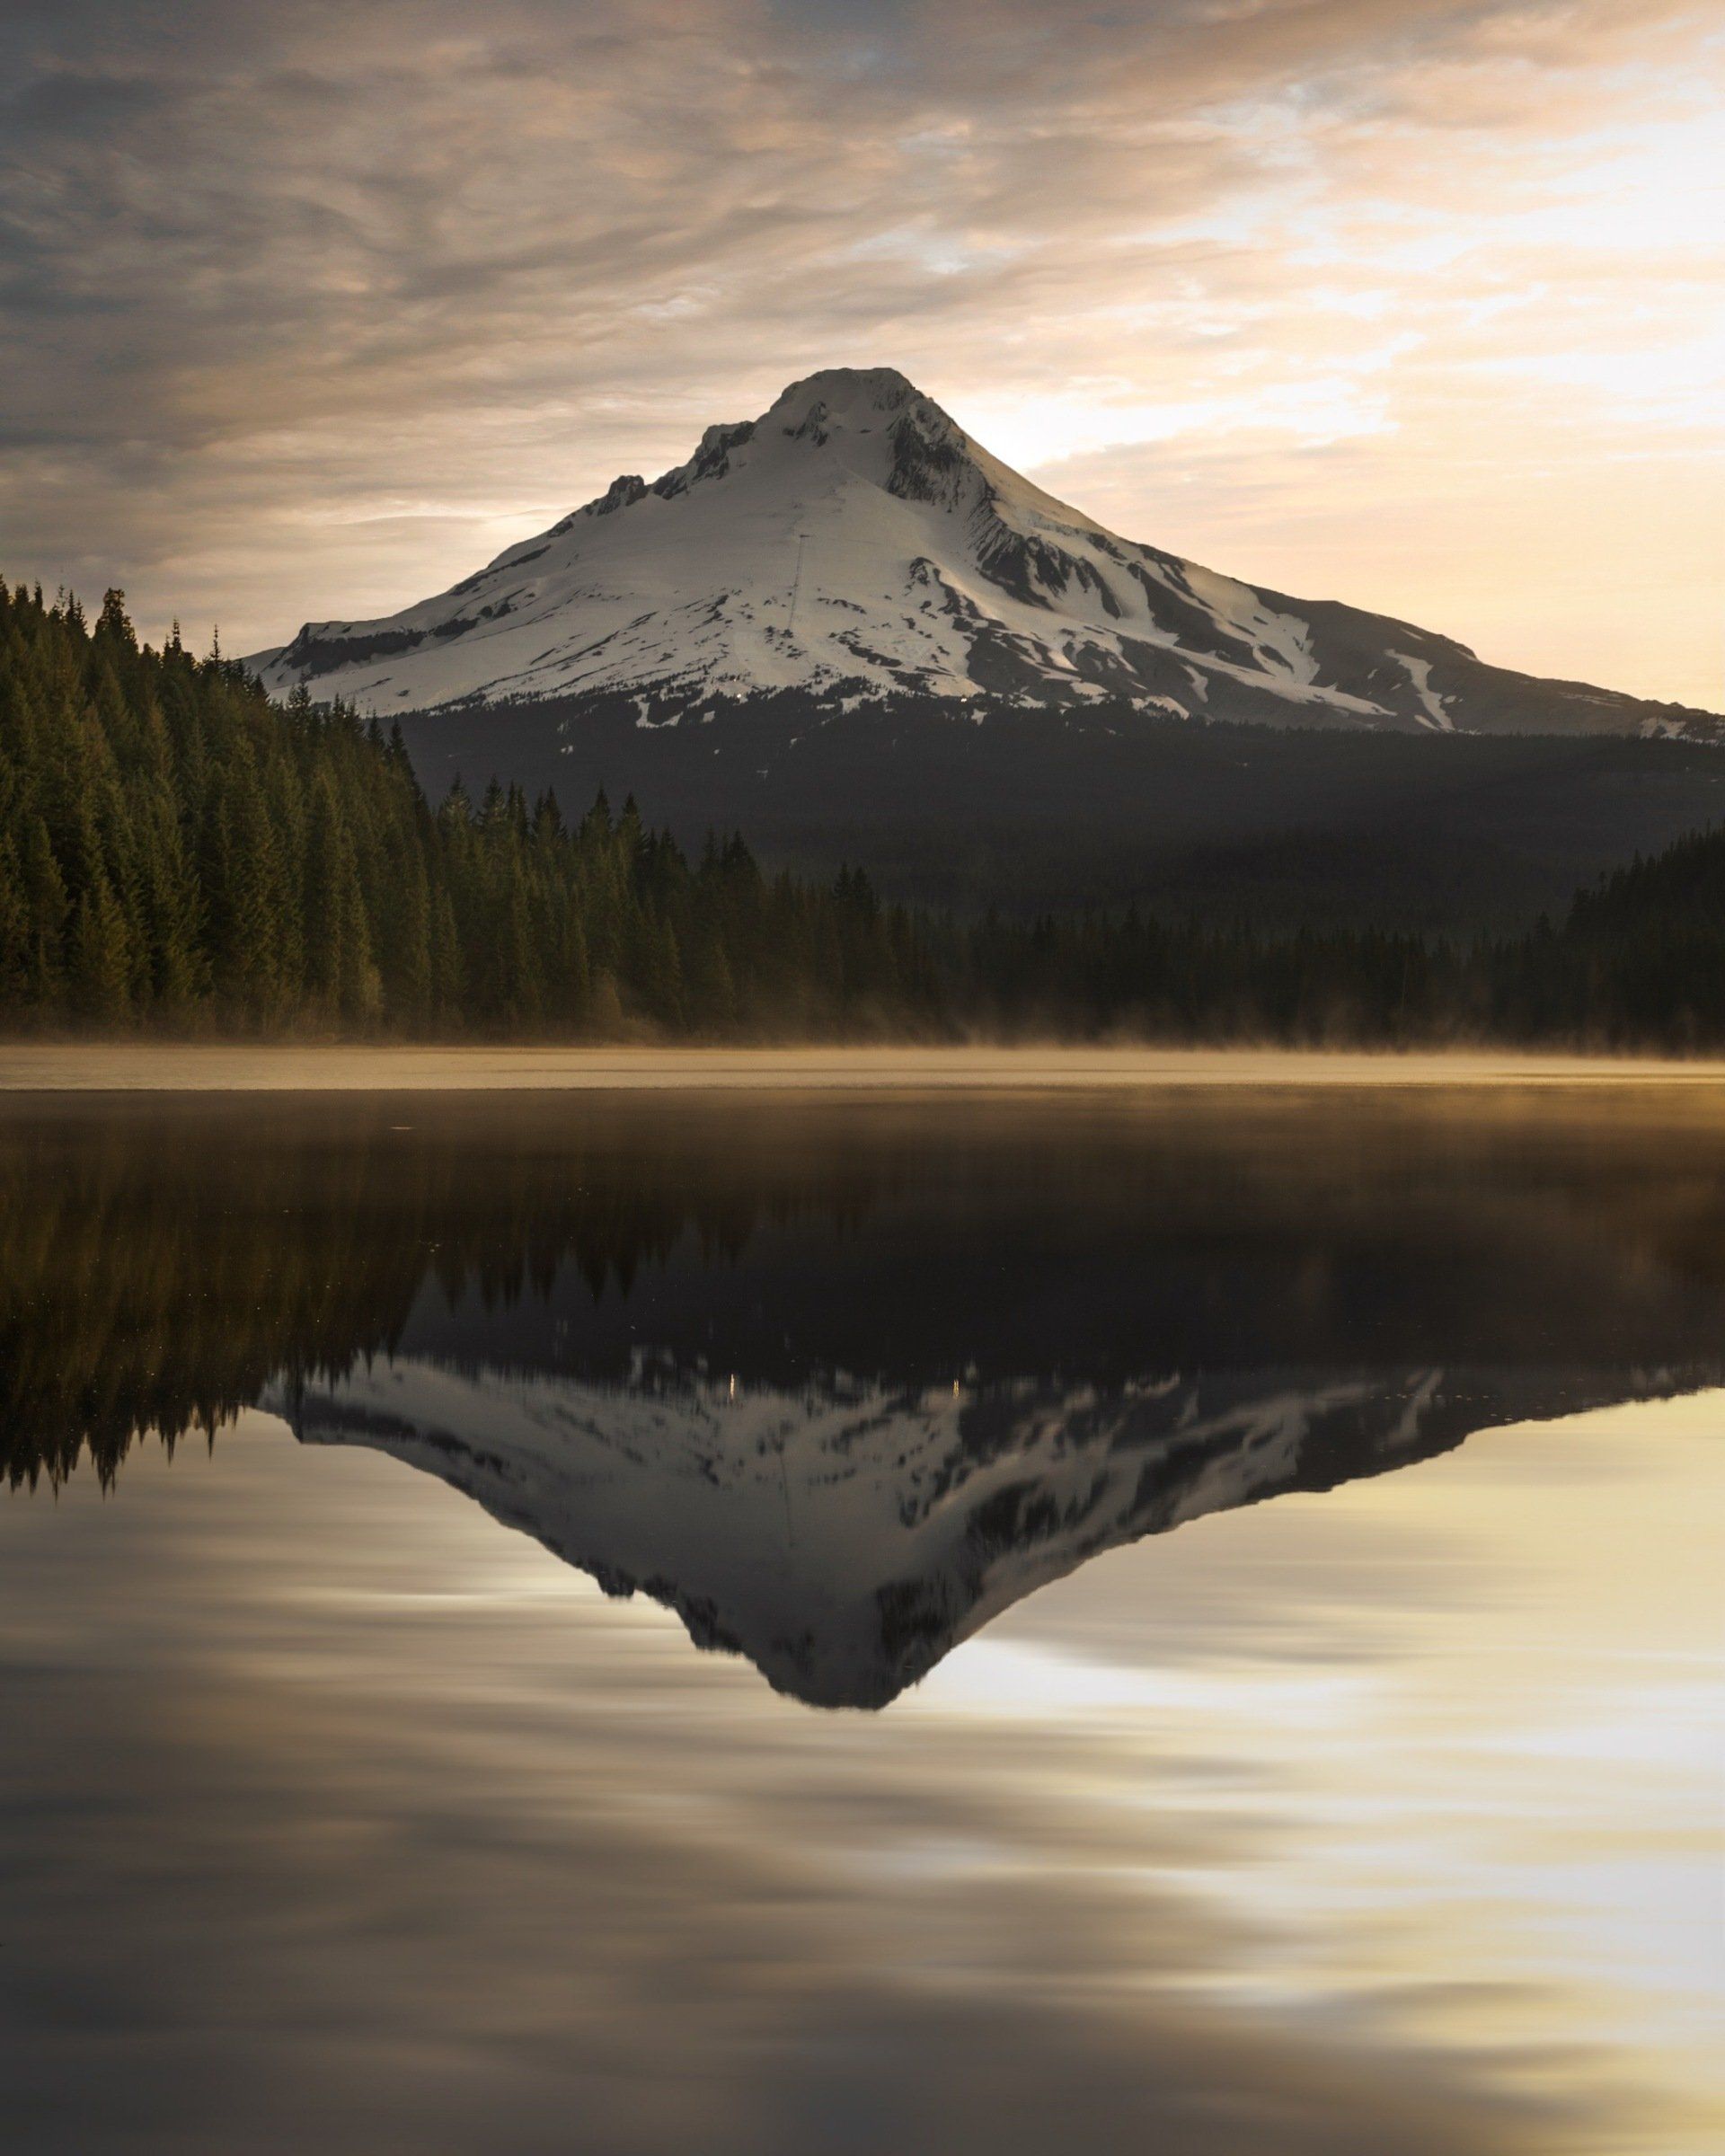 Beautiful mountain and calm lake scene - depicting the stillness of the present moment